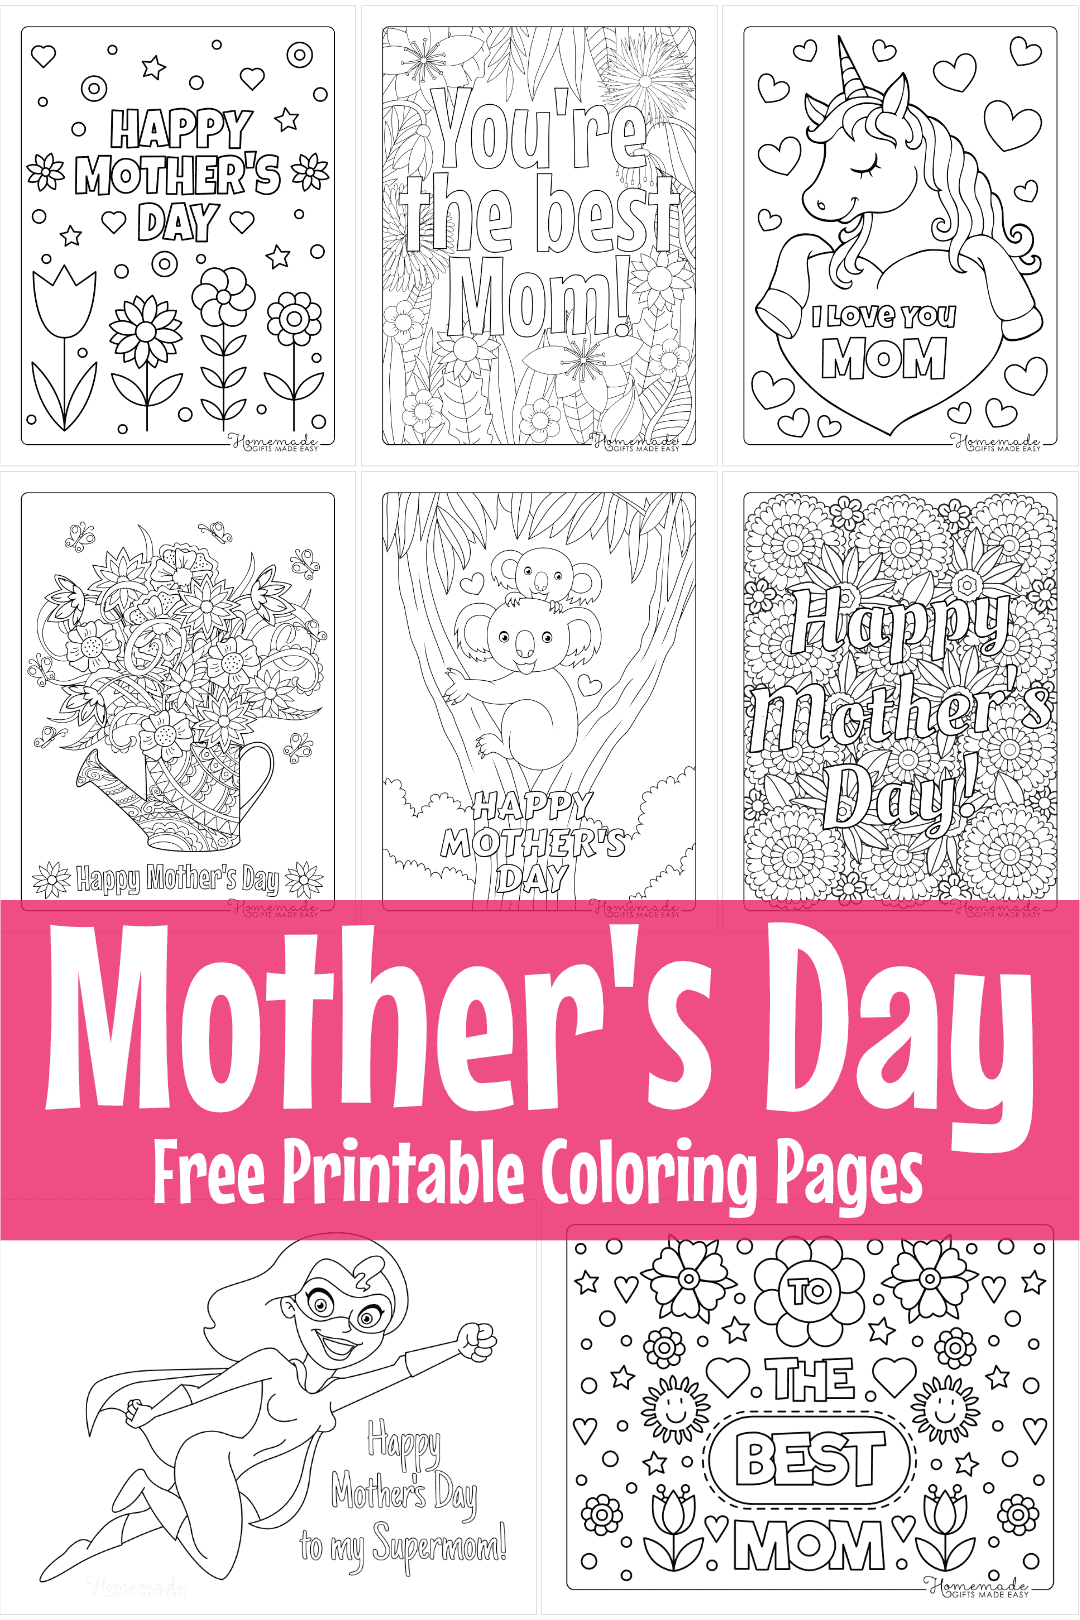 Mothers day drawing Vectors & Illustrations for Free Download | Freepik